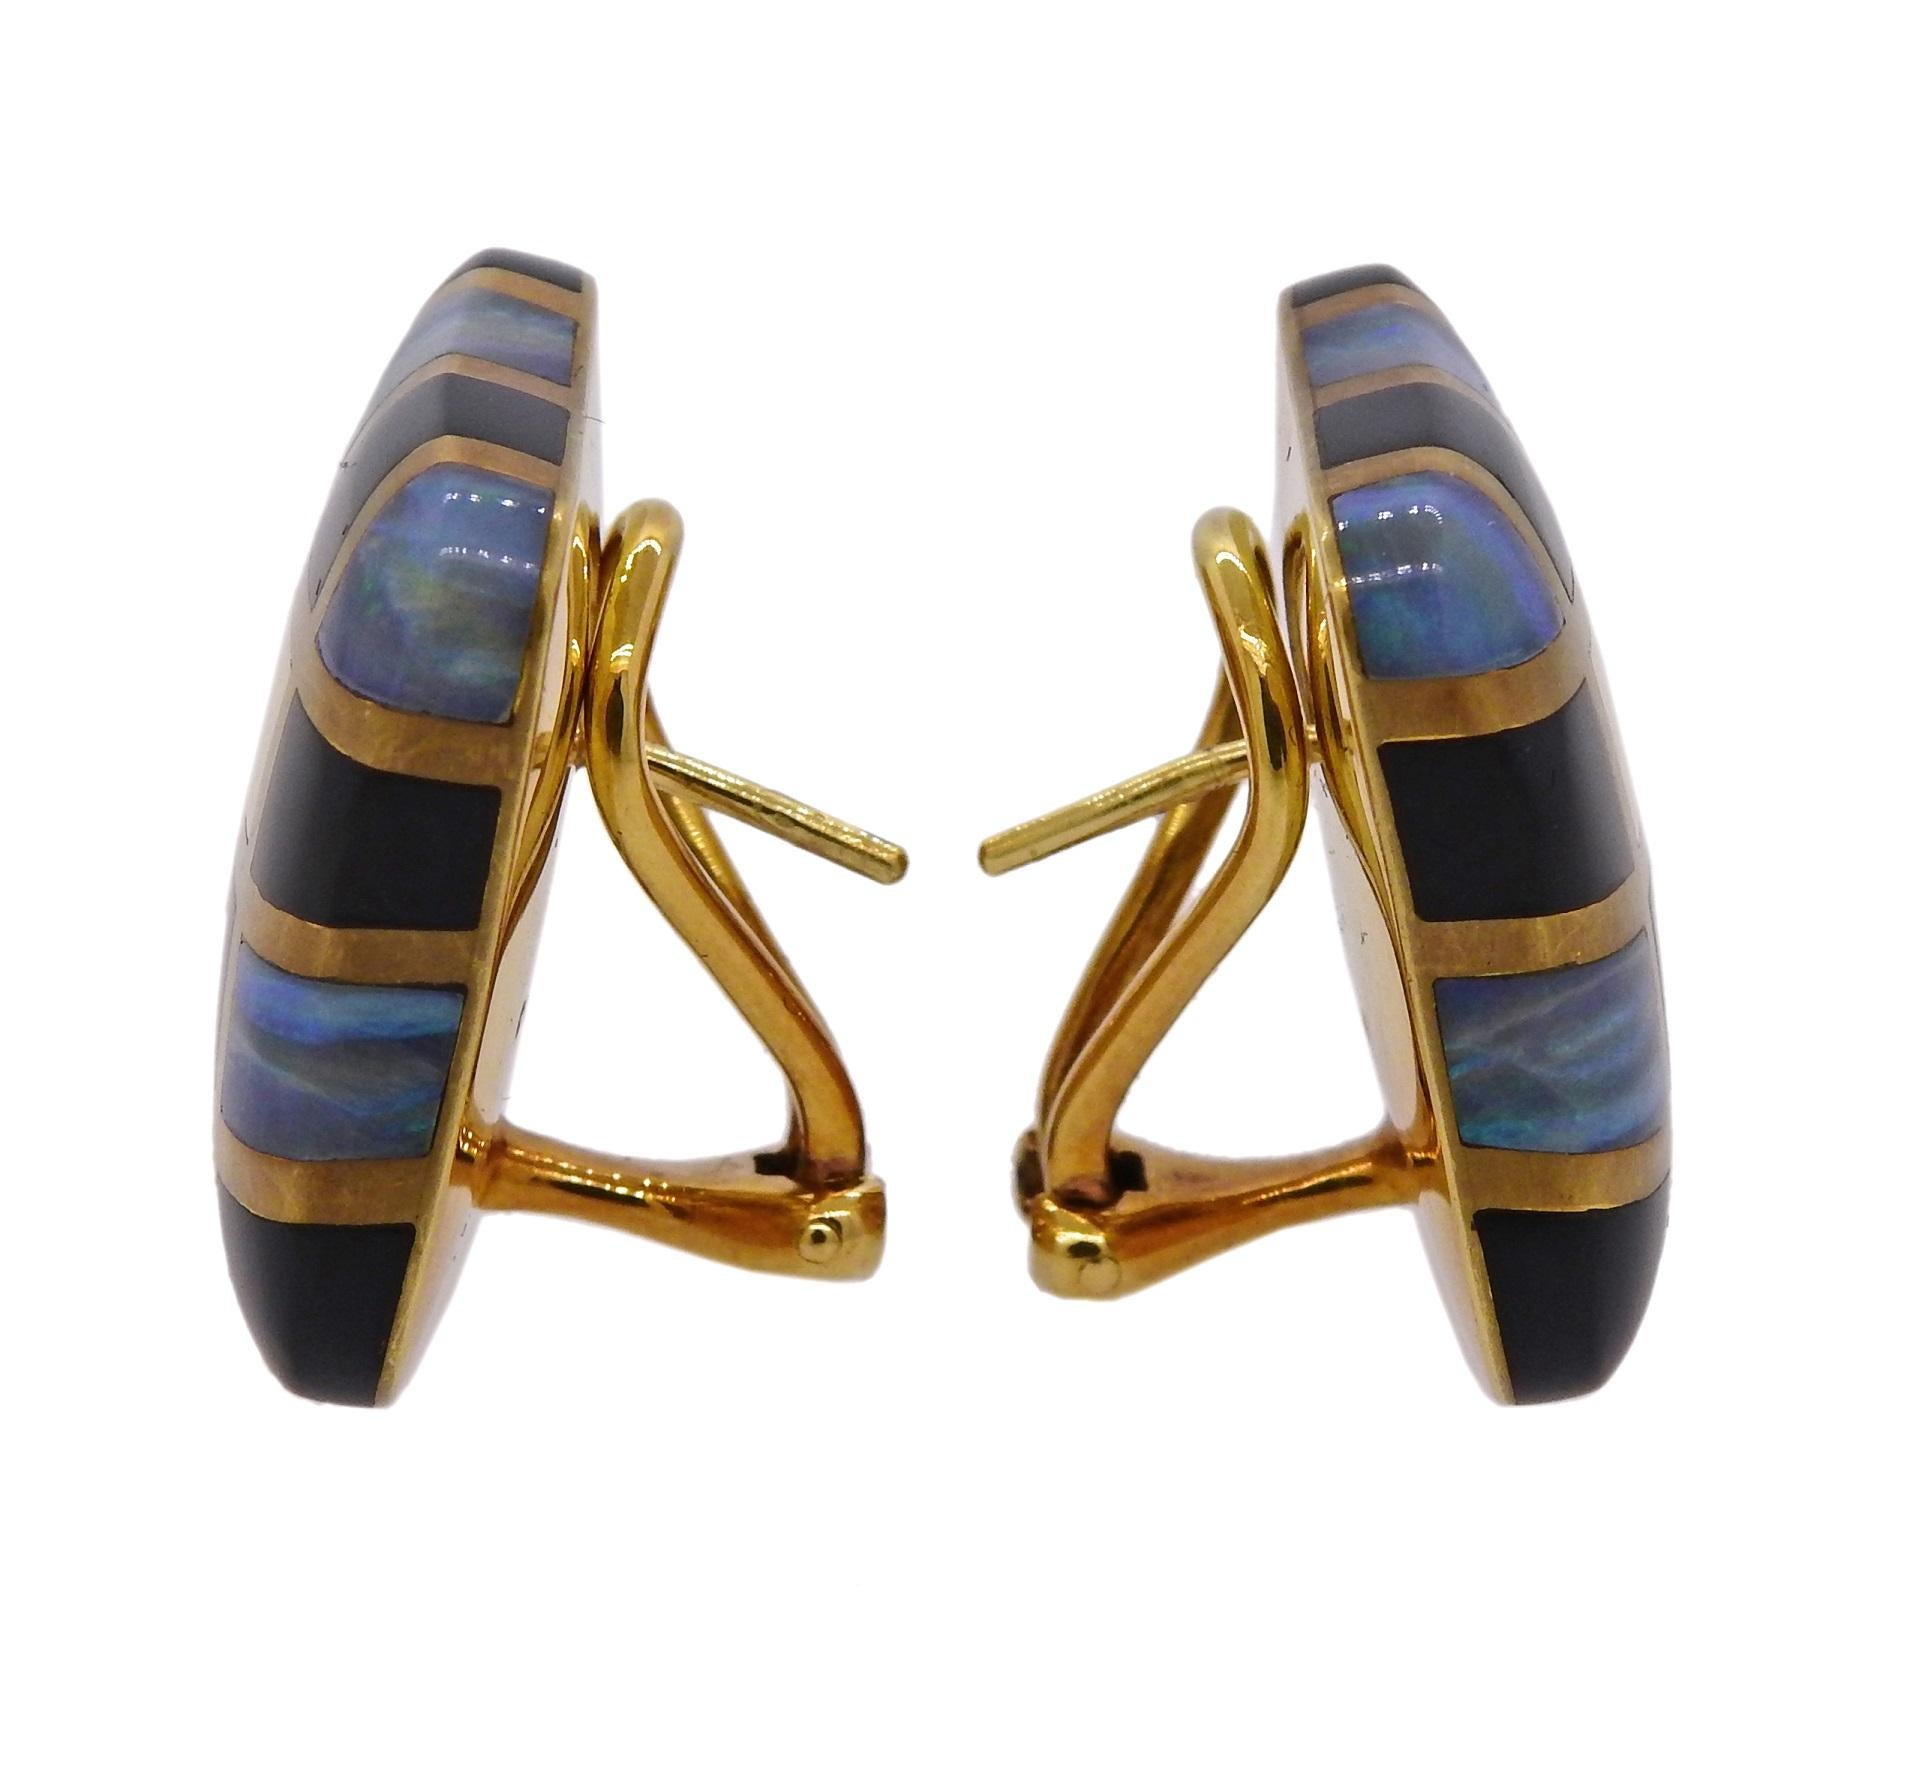 Iconic checkered inlay design earrings, crafted by Angela Cummings in 1984, set with onyx and opal. Earrings are 23mm x 22mm and weigh 24 grams. Marked 18k, Angela Cummings, 1984.